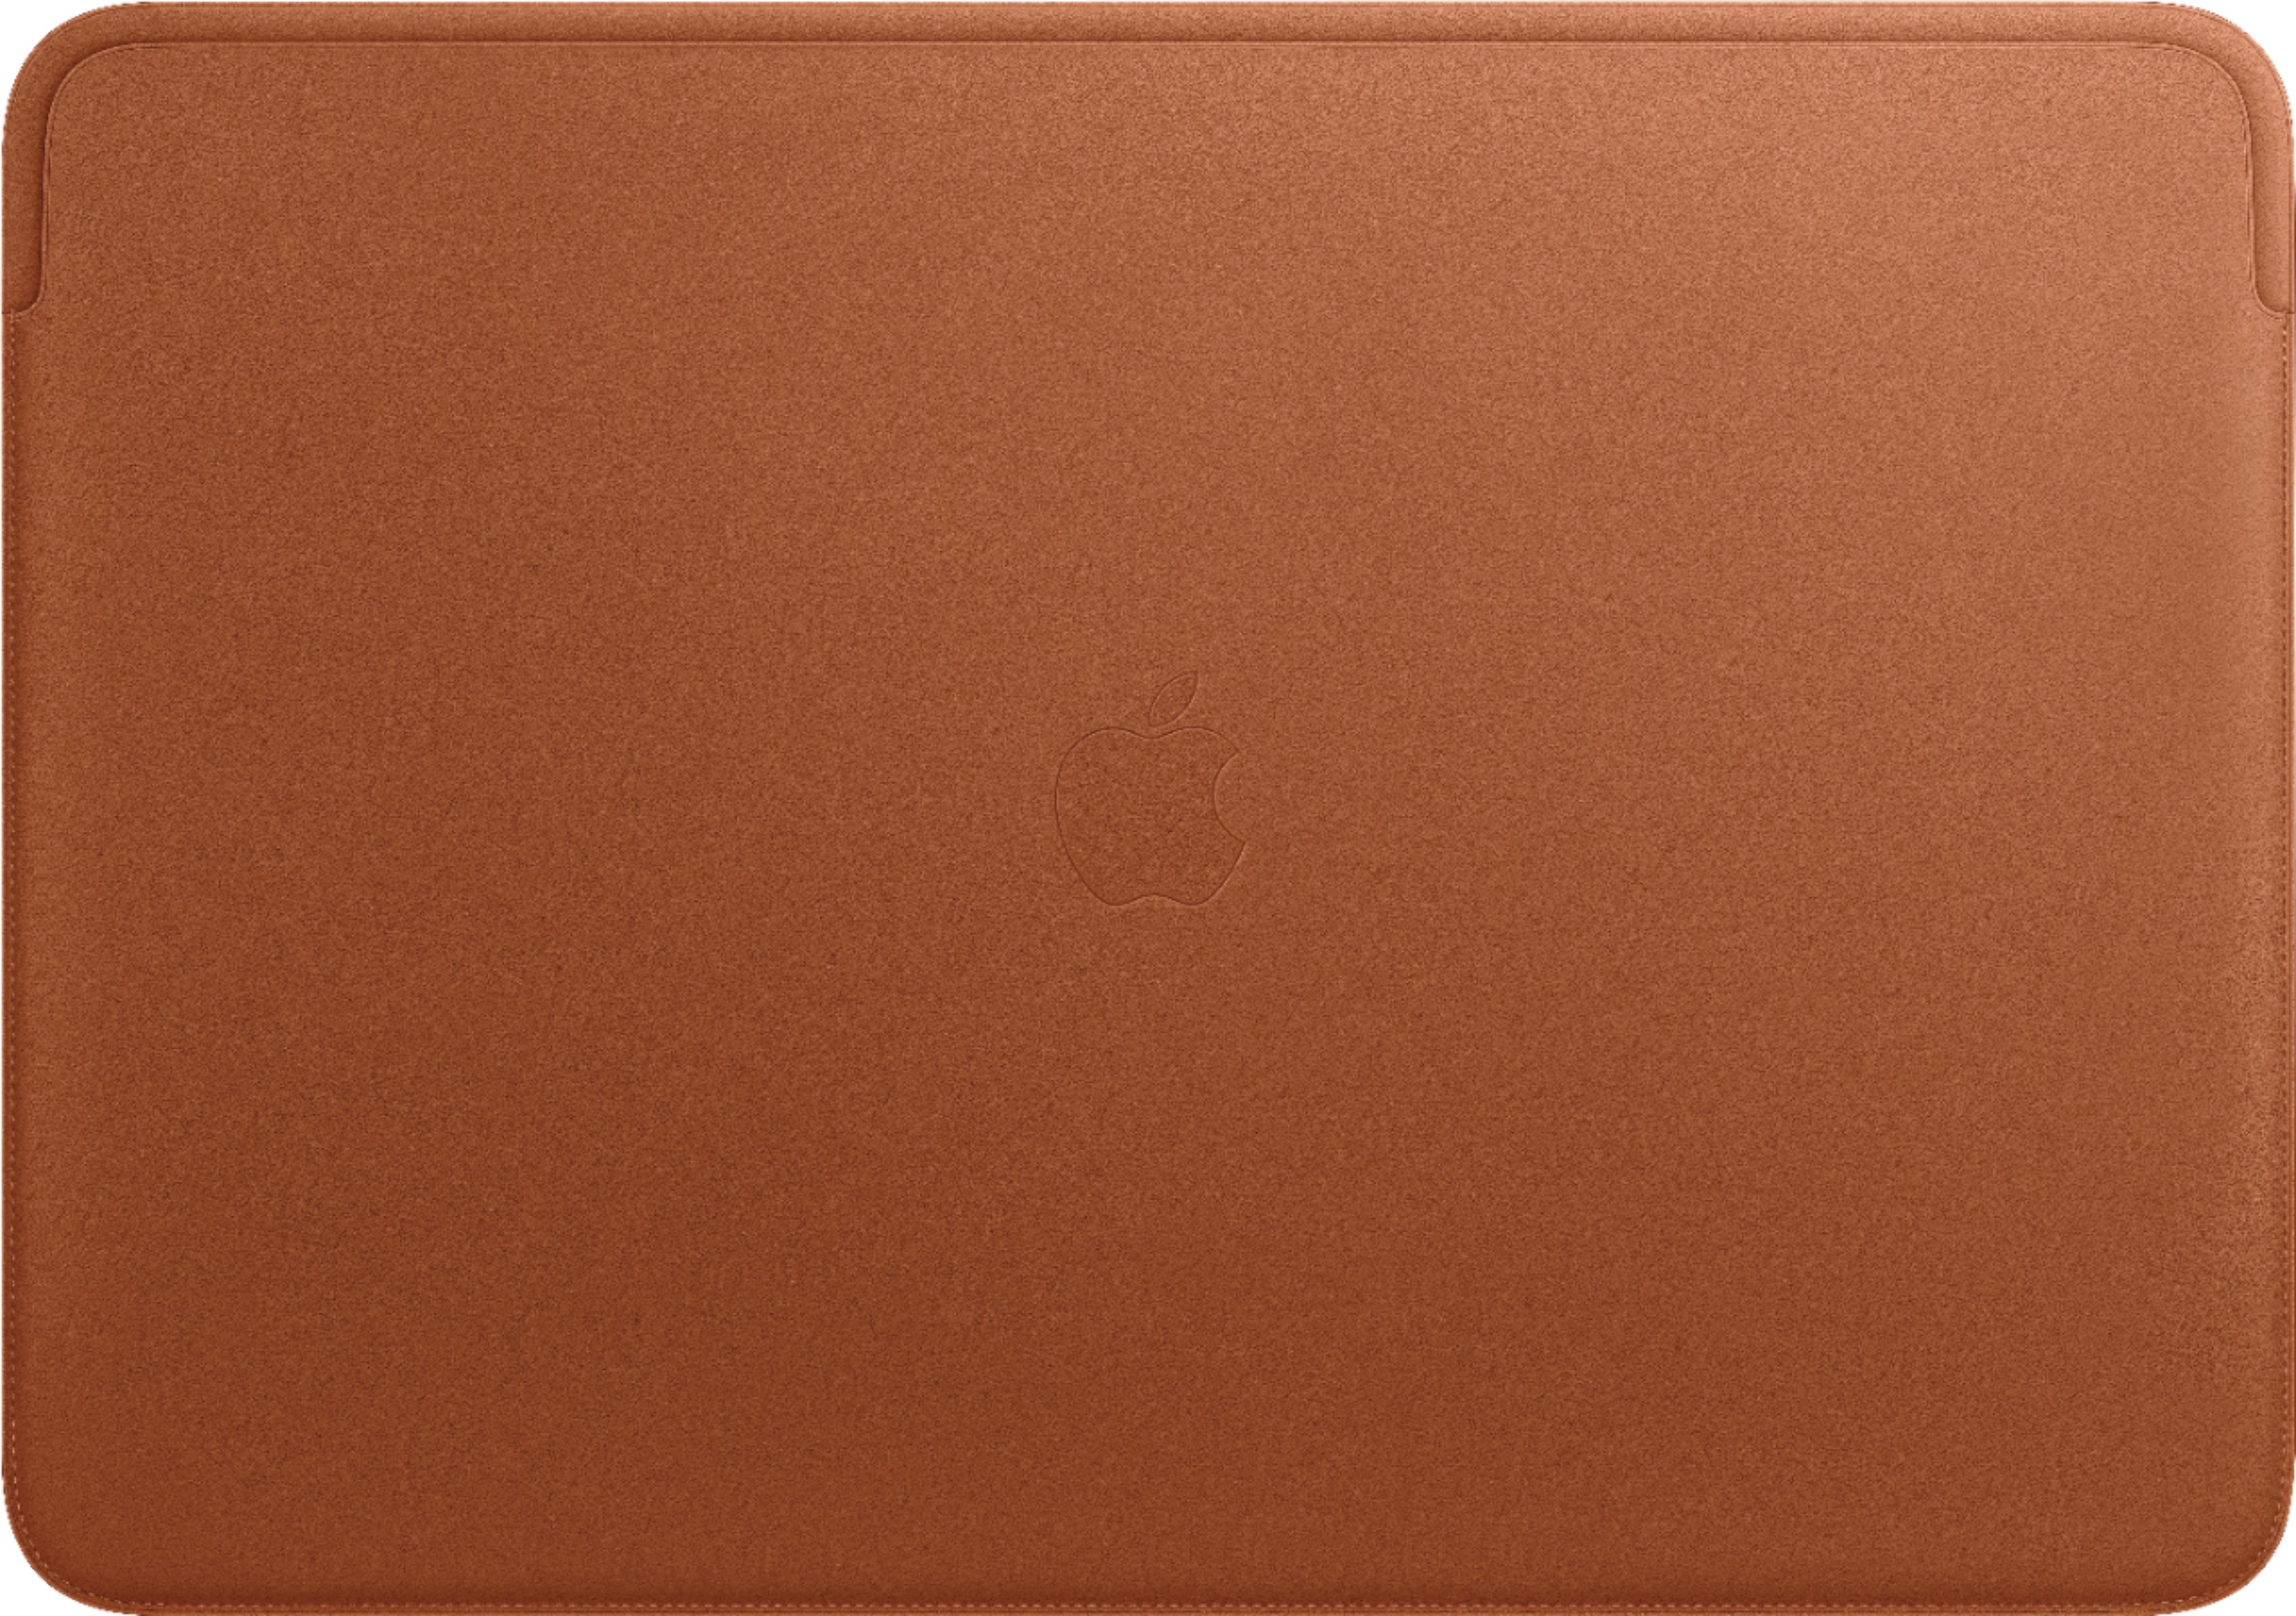 Review: Is Apple's Leather Sleeve for MacBook Pro worth the cost? [Video] -  9to5Mac